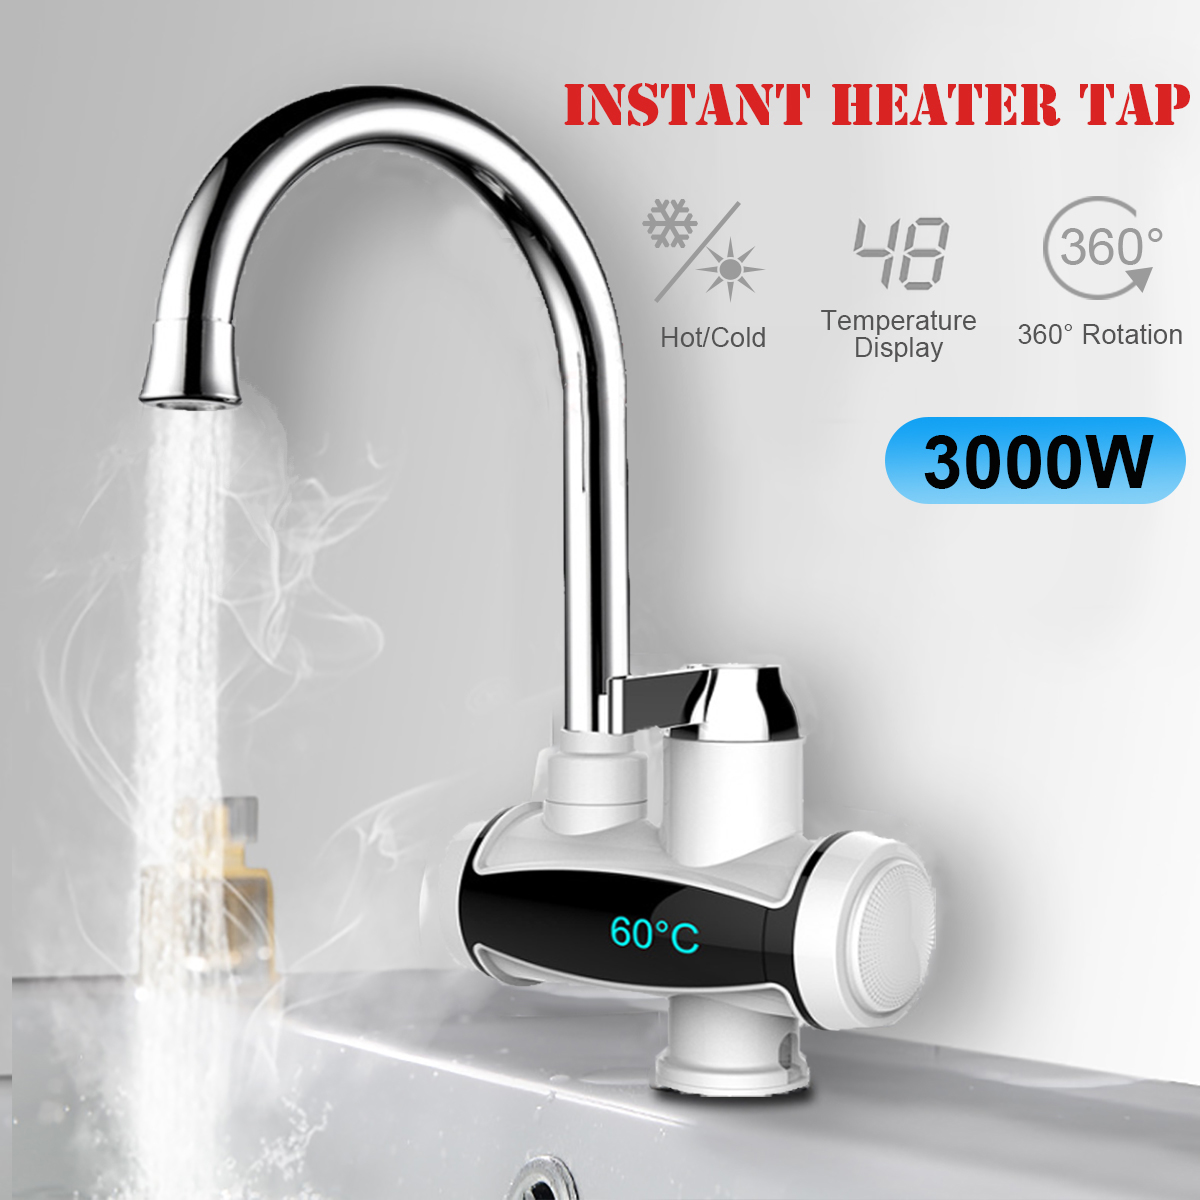 220V-3000W-Electric-Faucet-Instant-Hot-Water-Heater-Tap-Home-Bathroom-Kitchen-Faucet-1388305